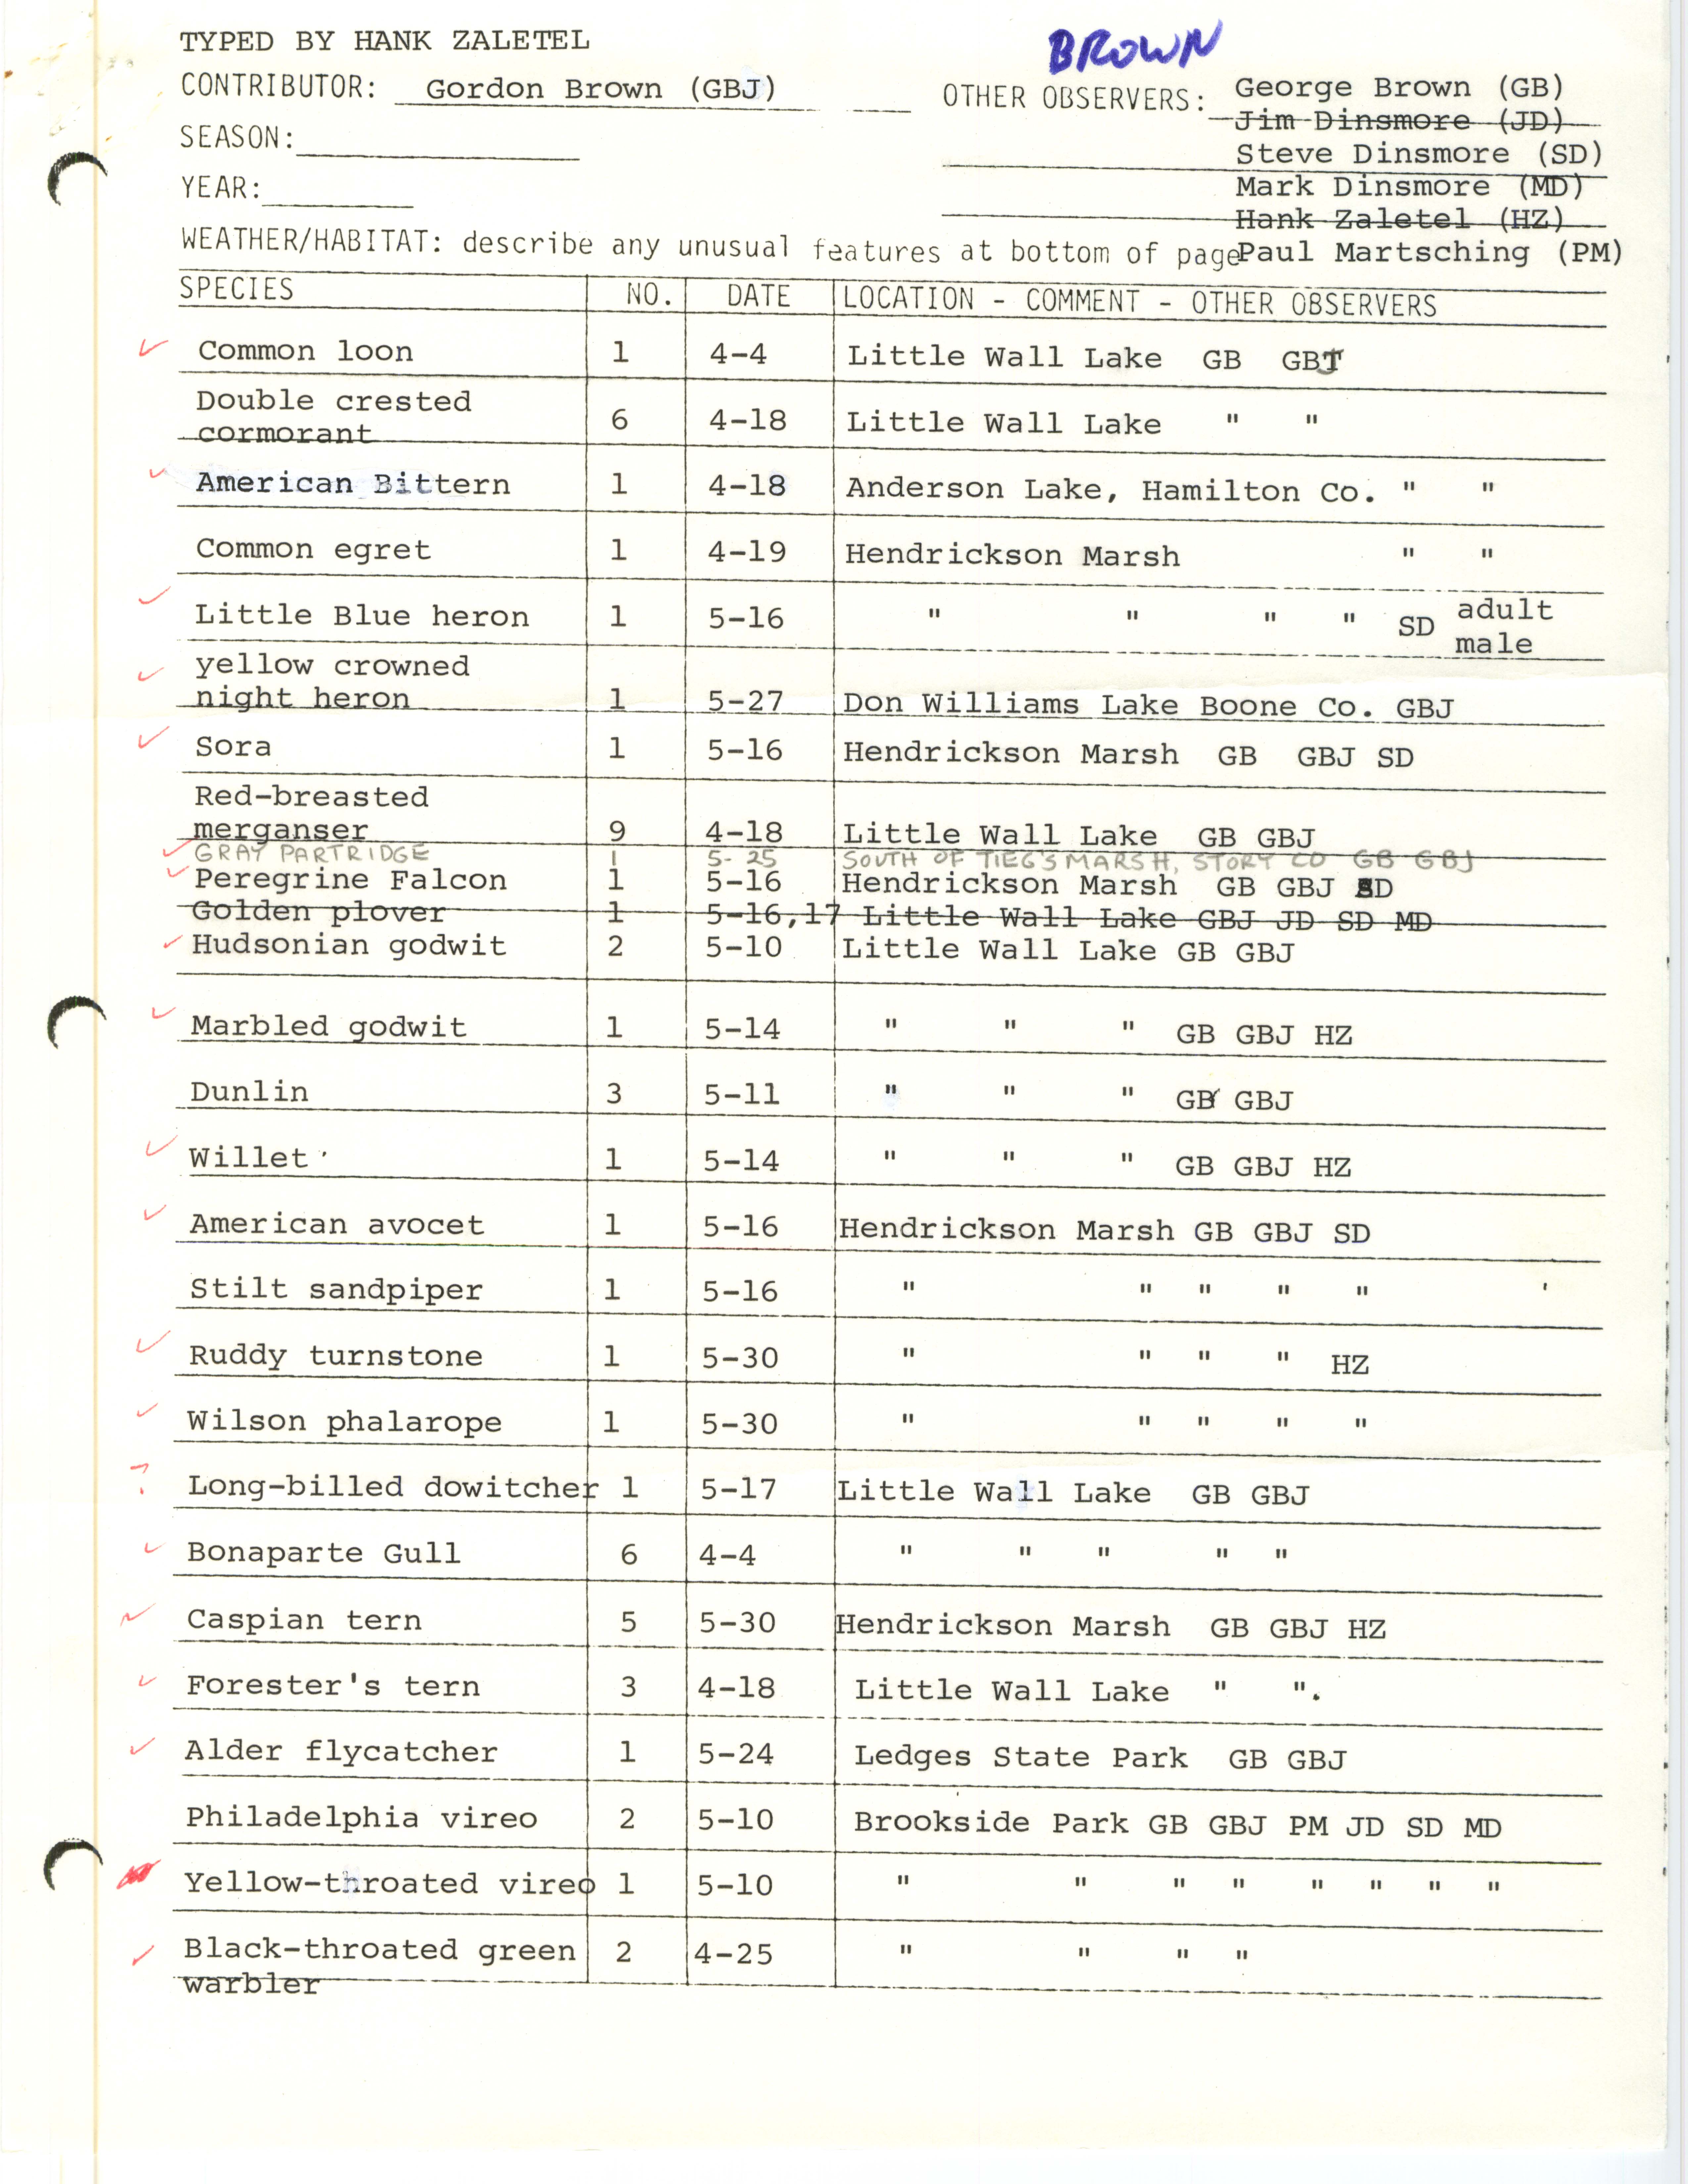 Annotated bird sighting list for spring 1981 compiled by Gordon Brown